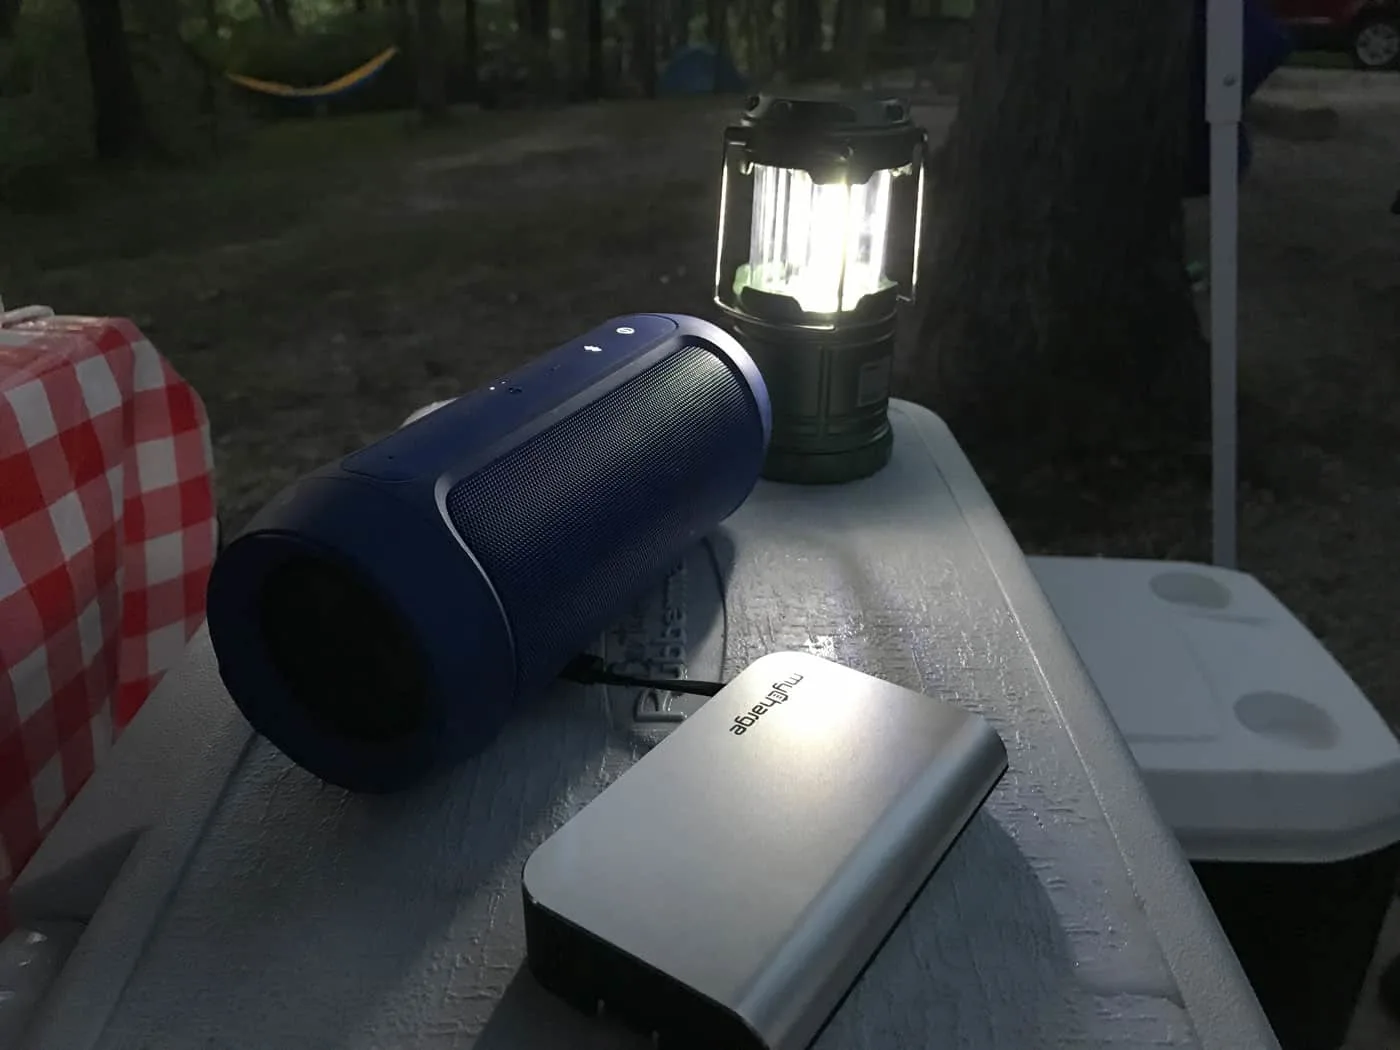 myCharge power bank on a cooler, plugged into a blue portable can speaker, camping lantern in the background.